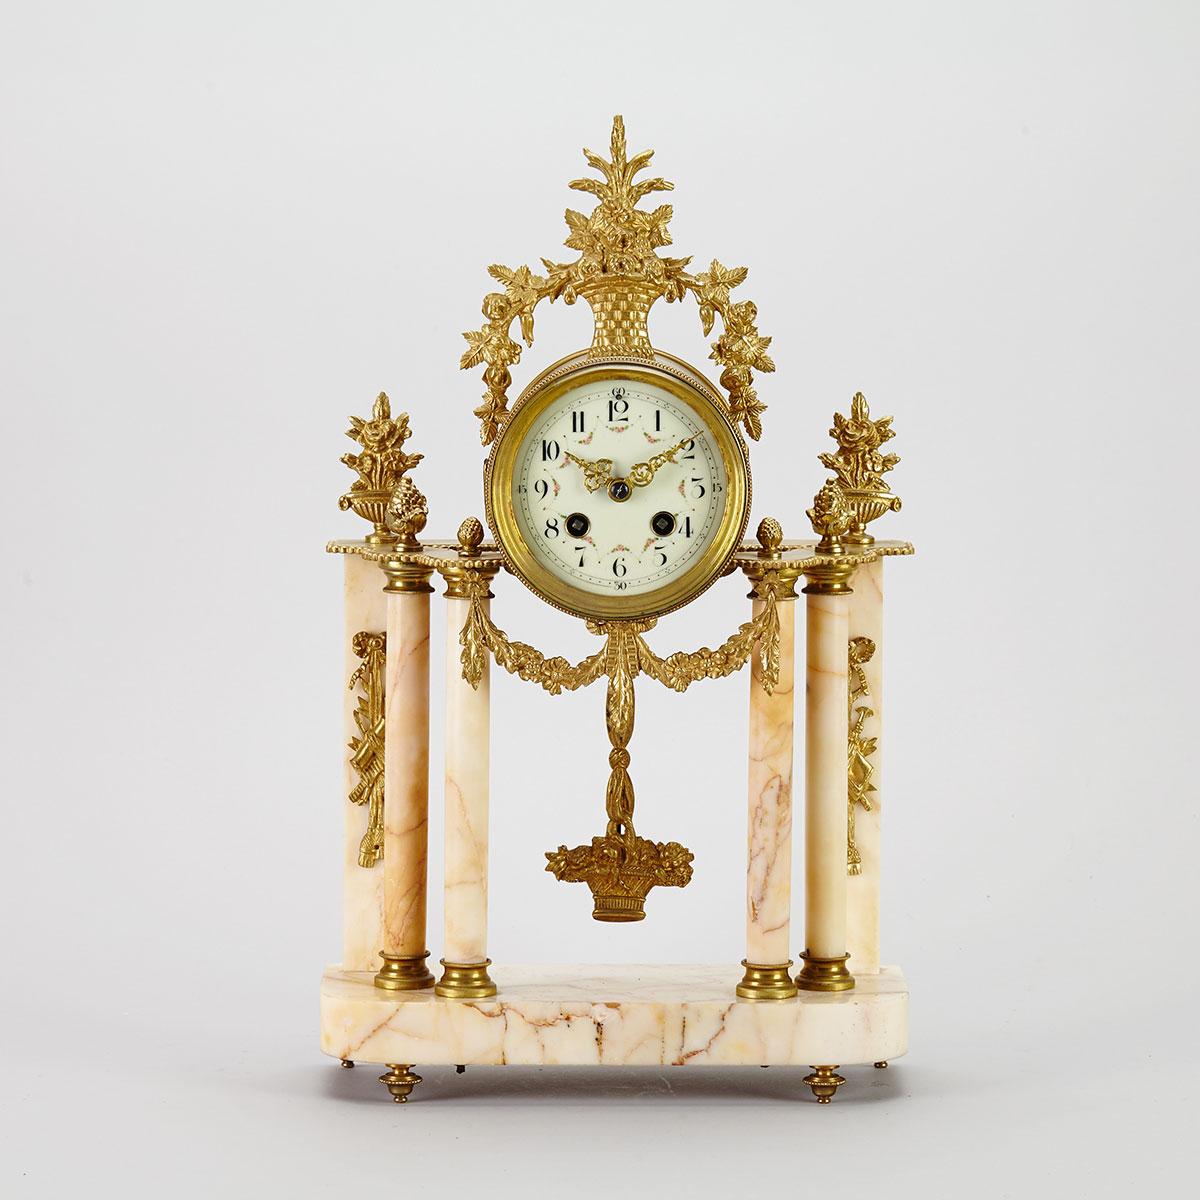 French Ormolu Mounted Marble Portico Form Mantle Clock, early-mid 20th century